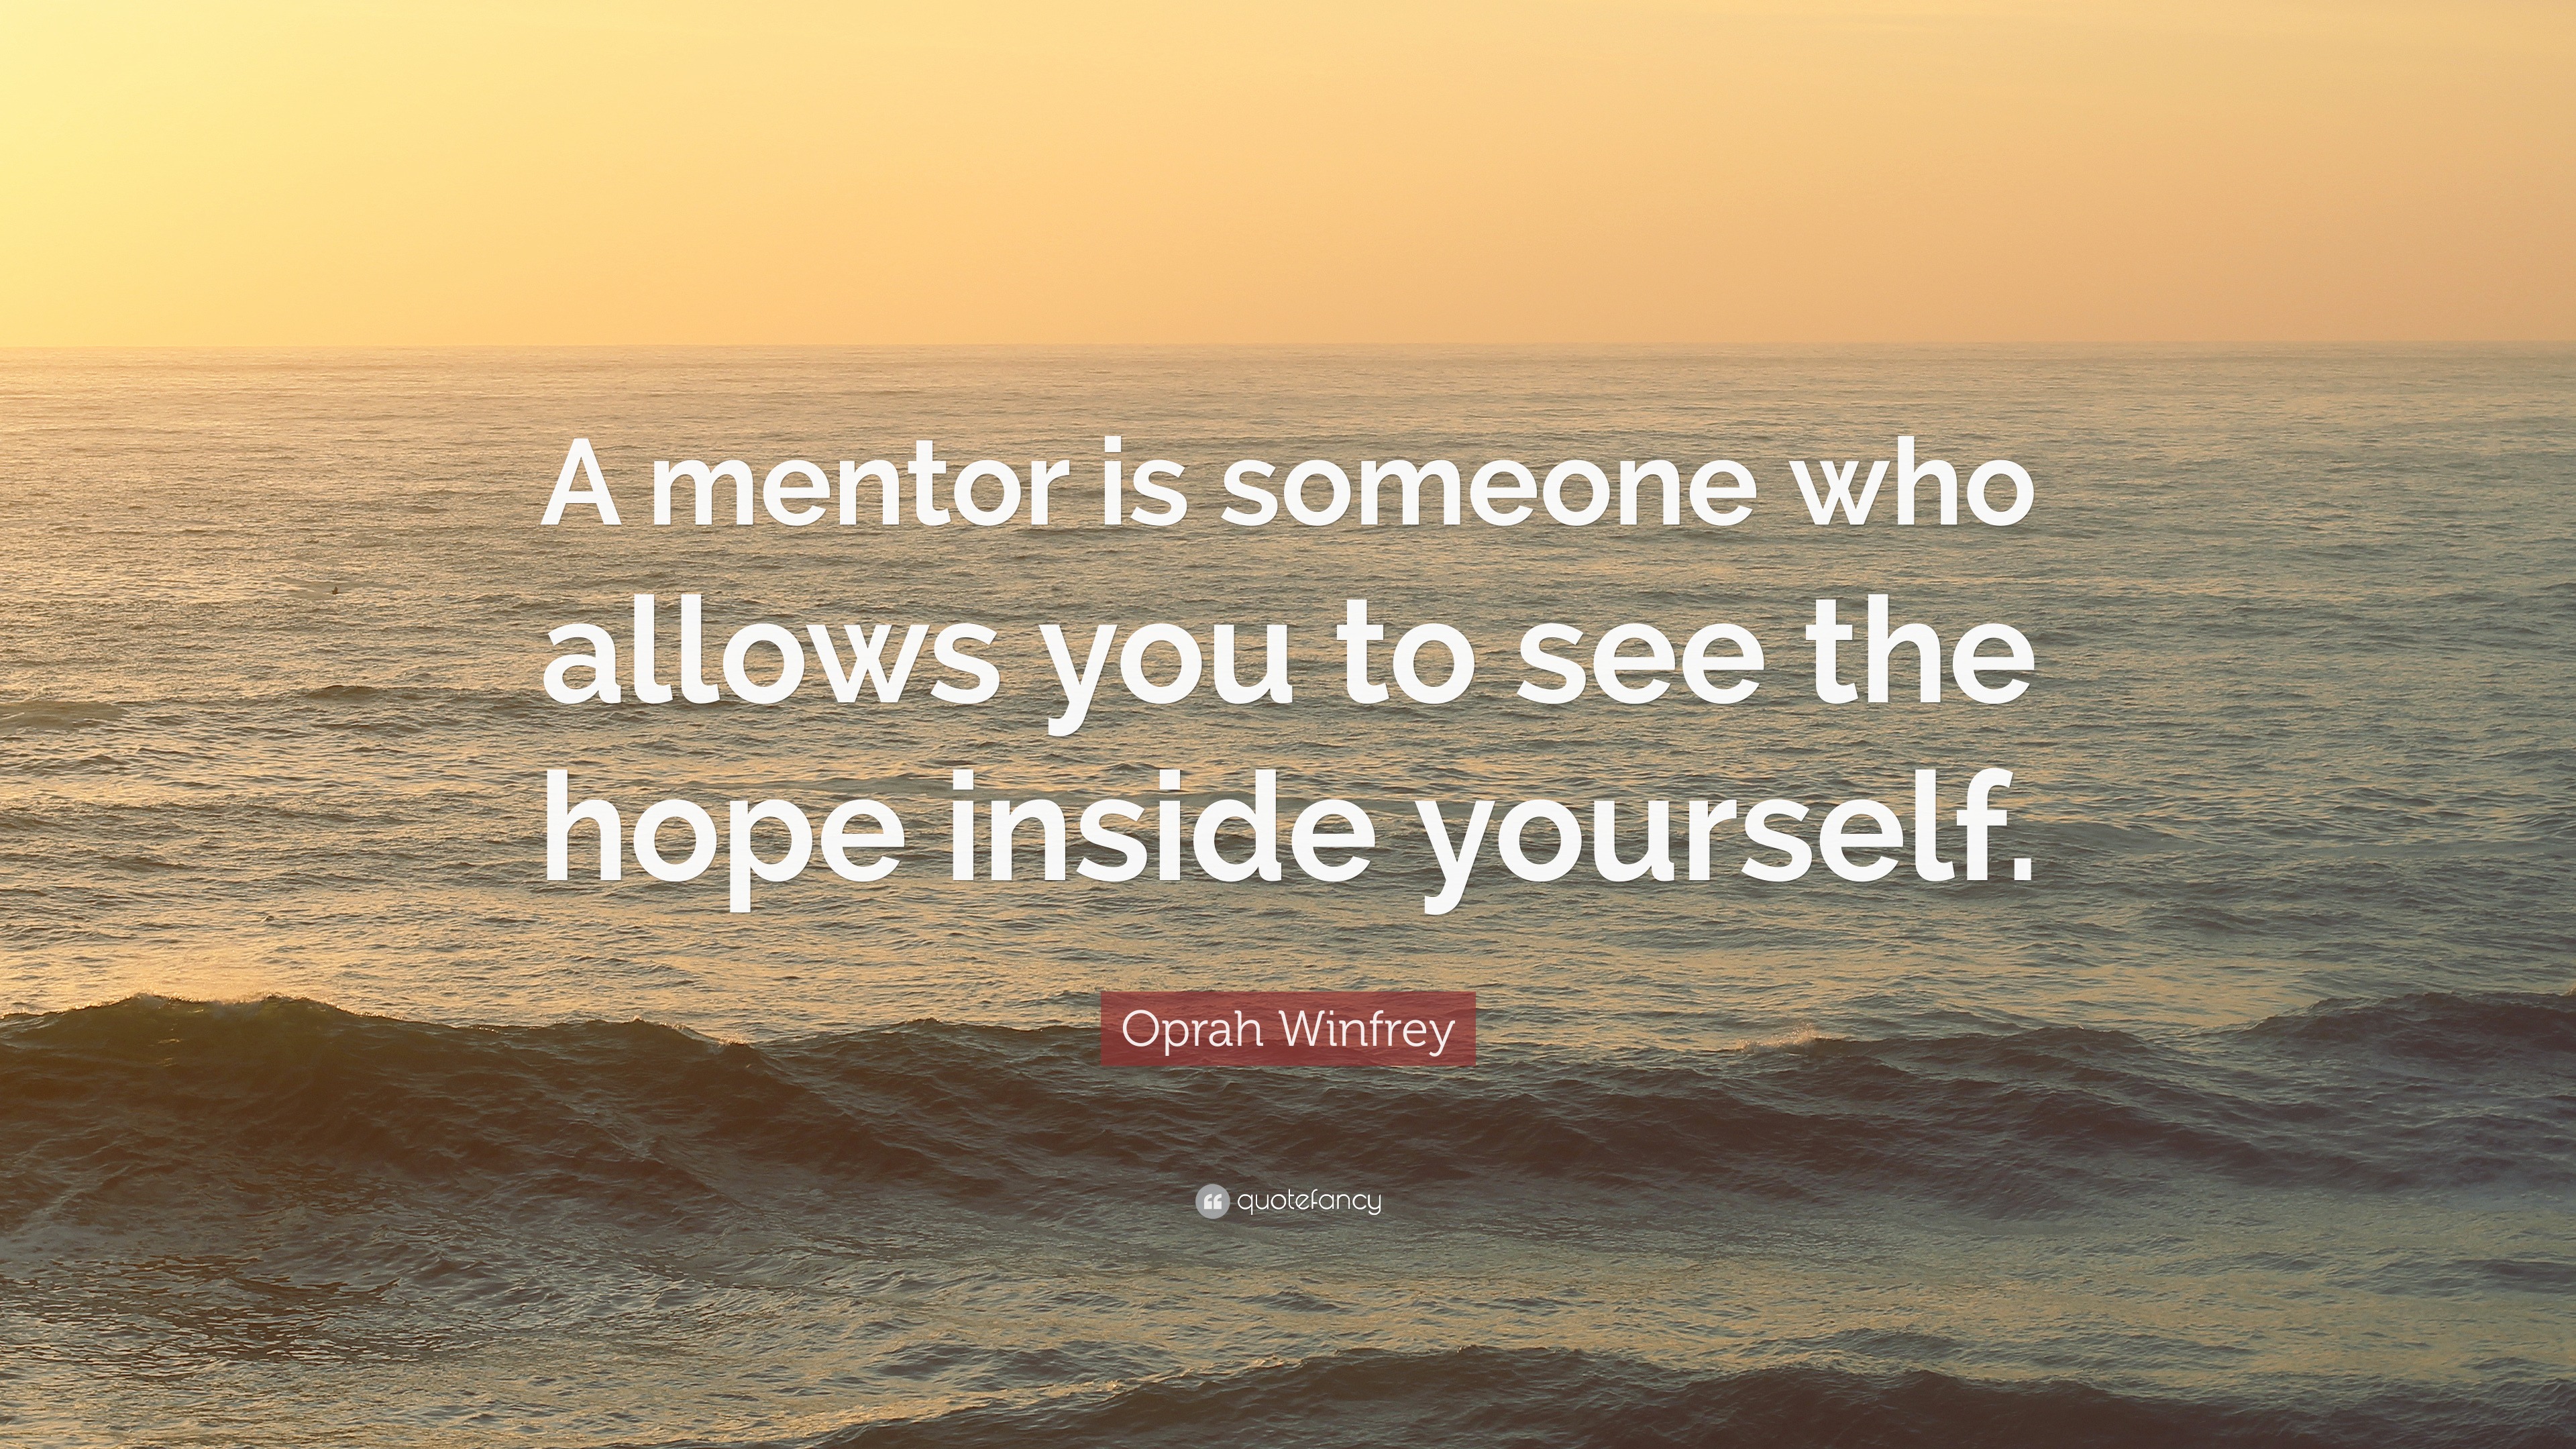 Oprah Winfrey Quote: “A mentor is someone who allows you to see hope inside yourself.”